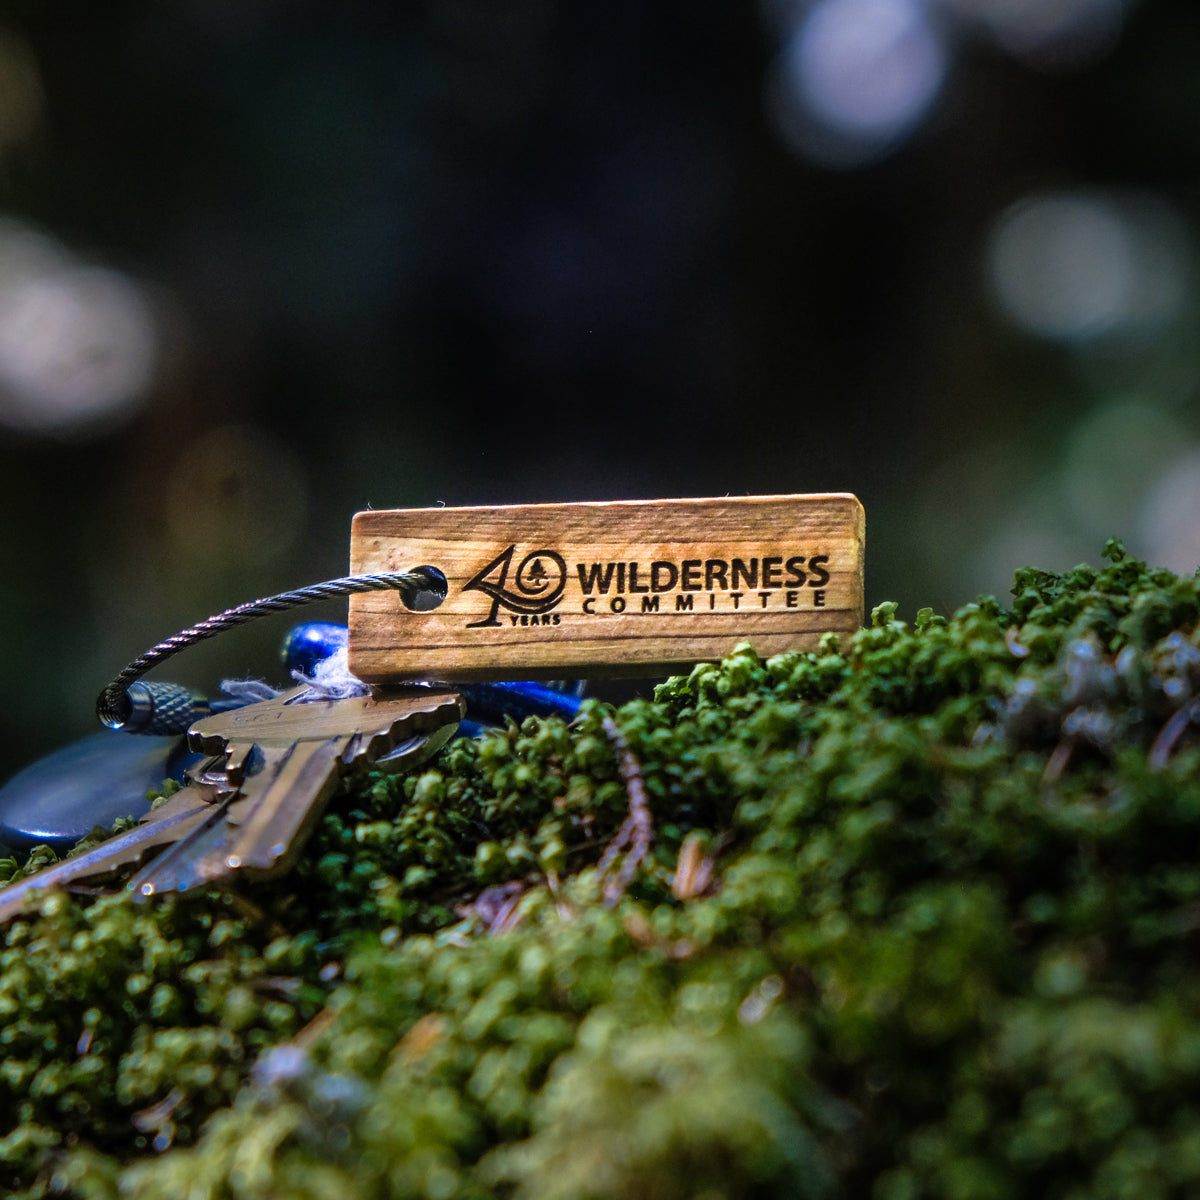 A keychain with the Wilderness Committee logo. End of image description.